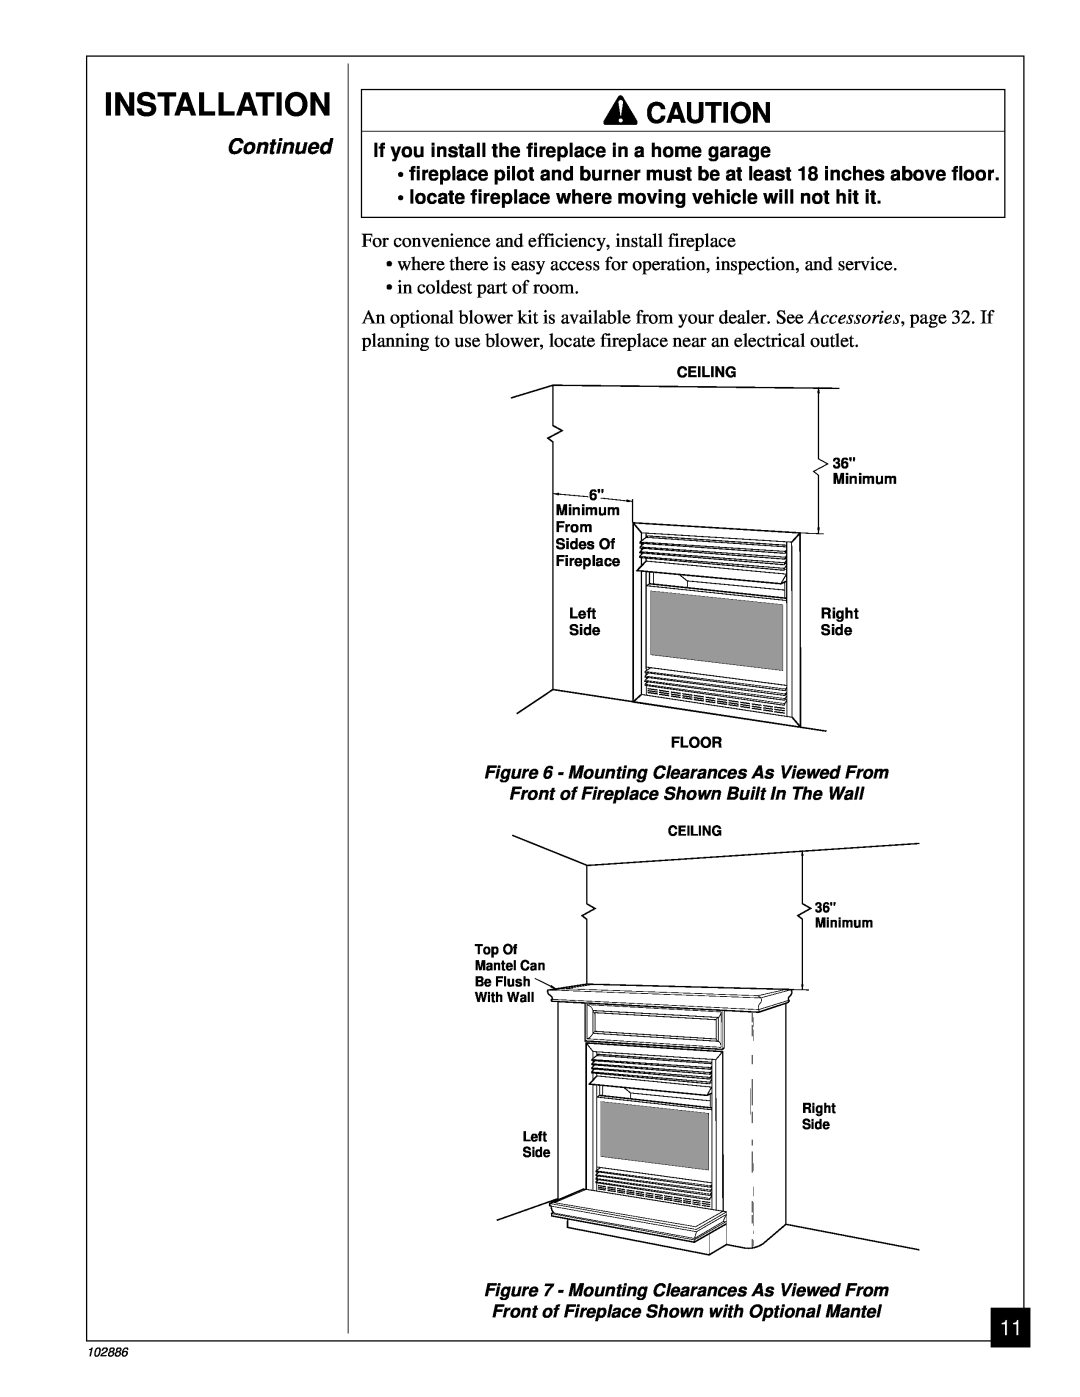 Vanguard Heating VMH26TPB installation manual Installation, Continued, If you install the fireplace in a home garage 